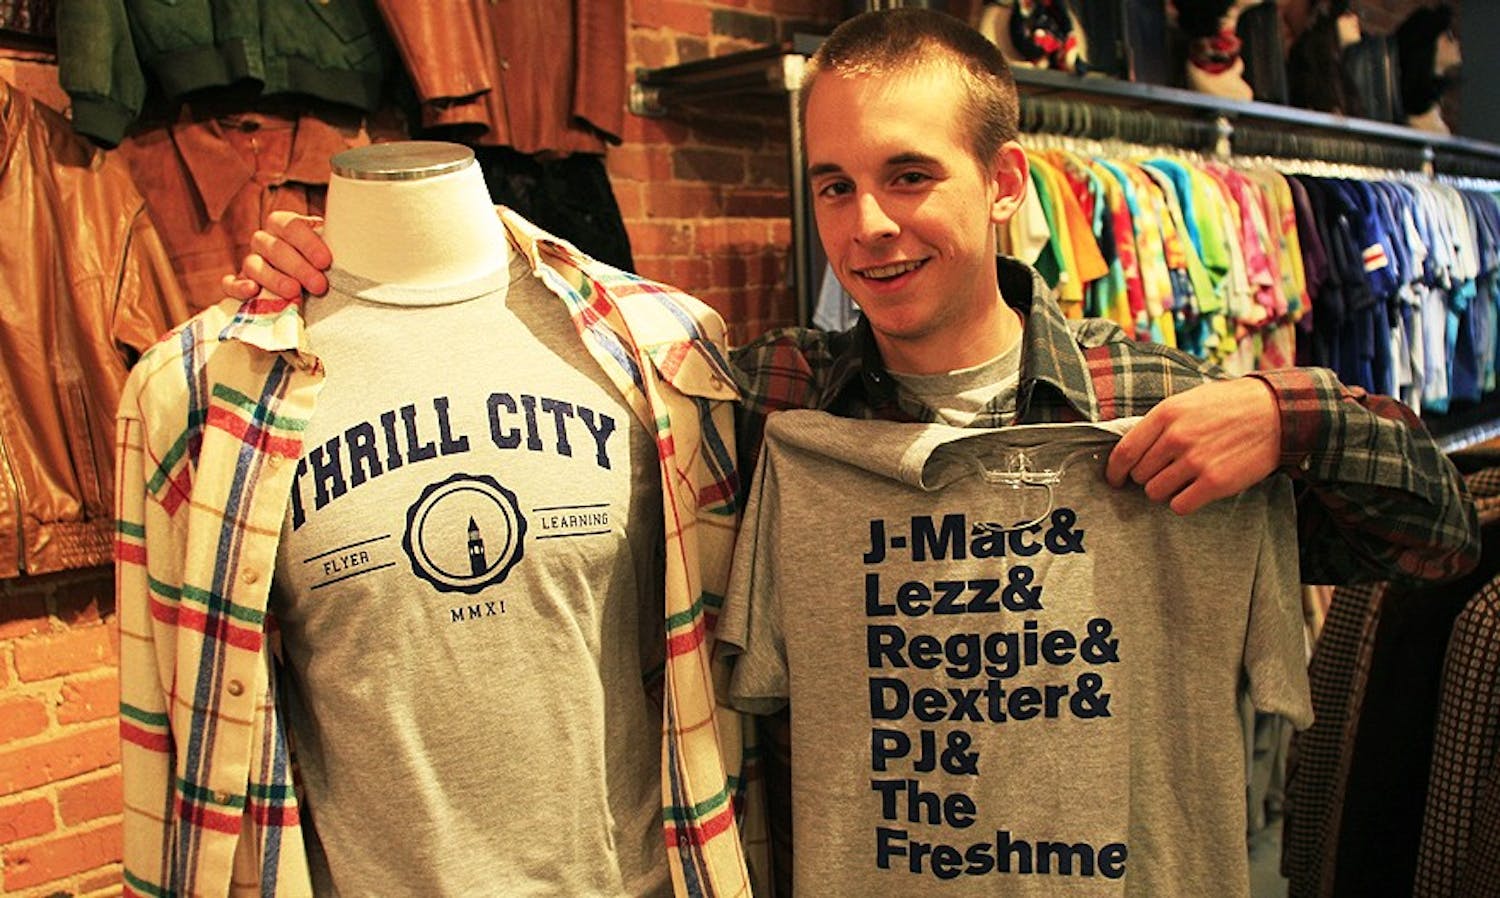 Ryan Cocca, a photojournalism major at UNC, founded the clothing brand, Thrill City. 